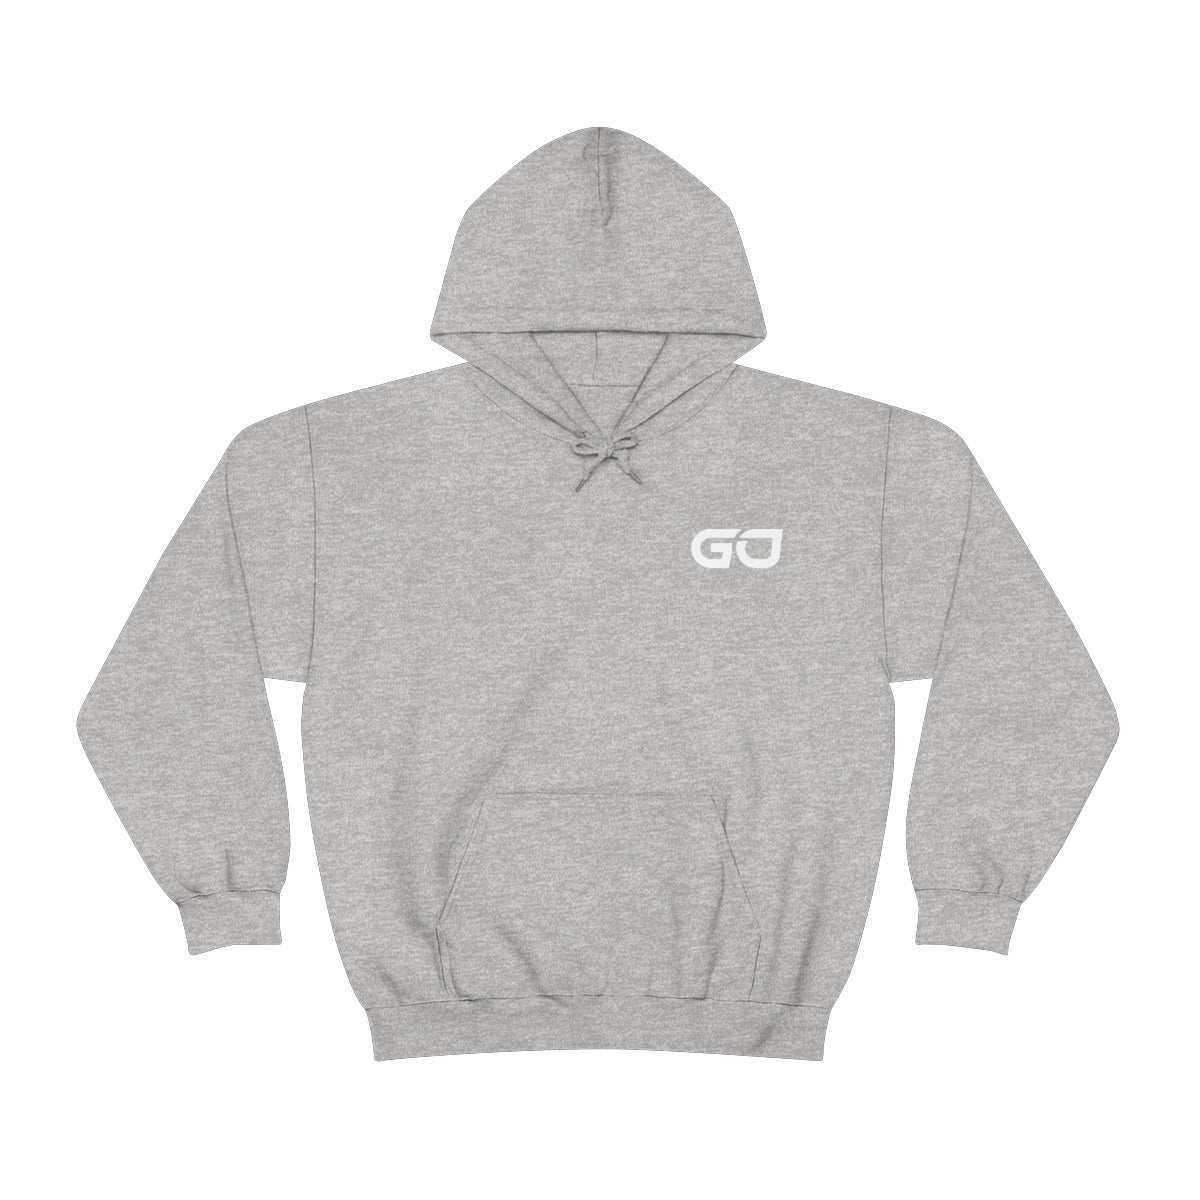 Gabriel Onorato "GO" Hoodie